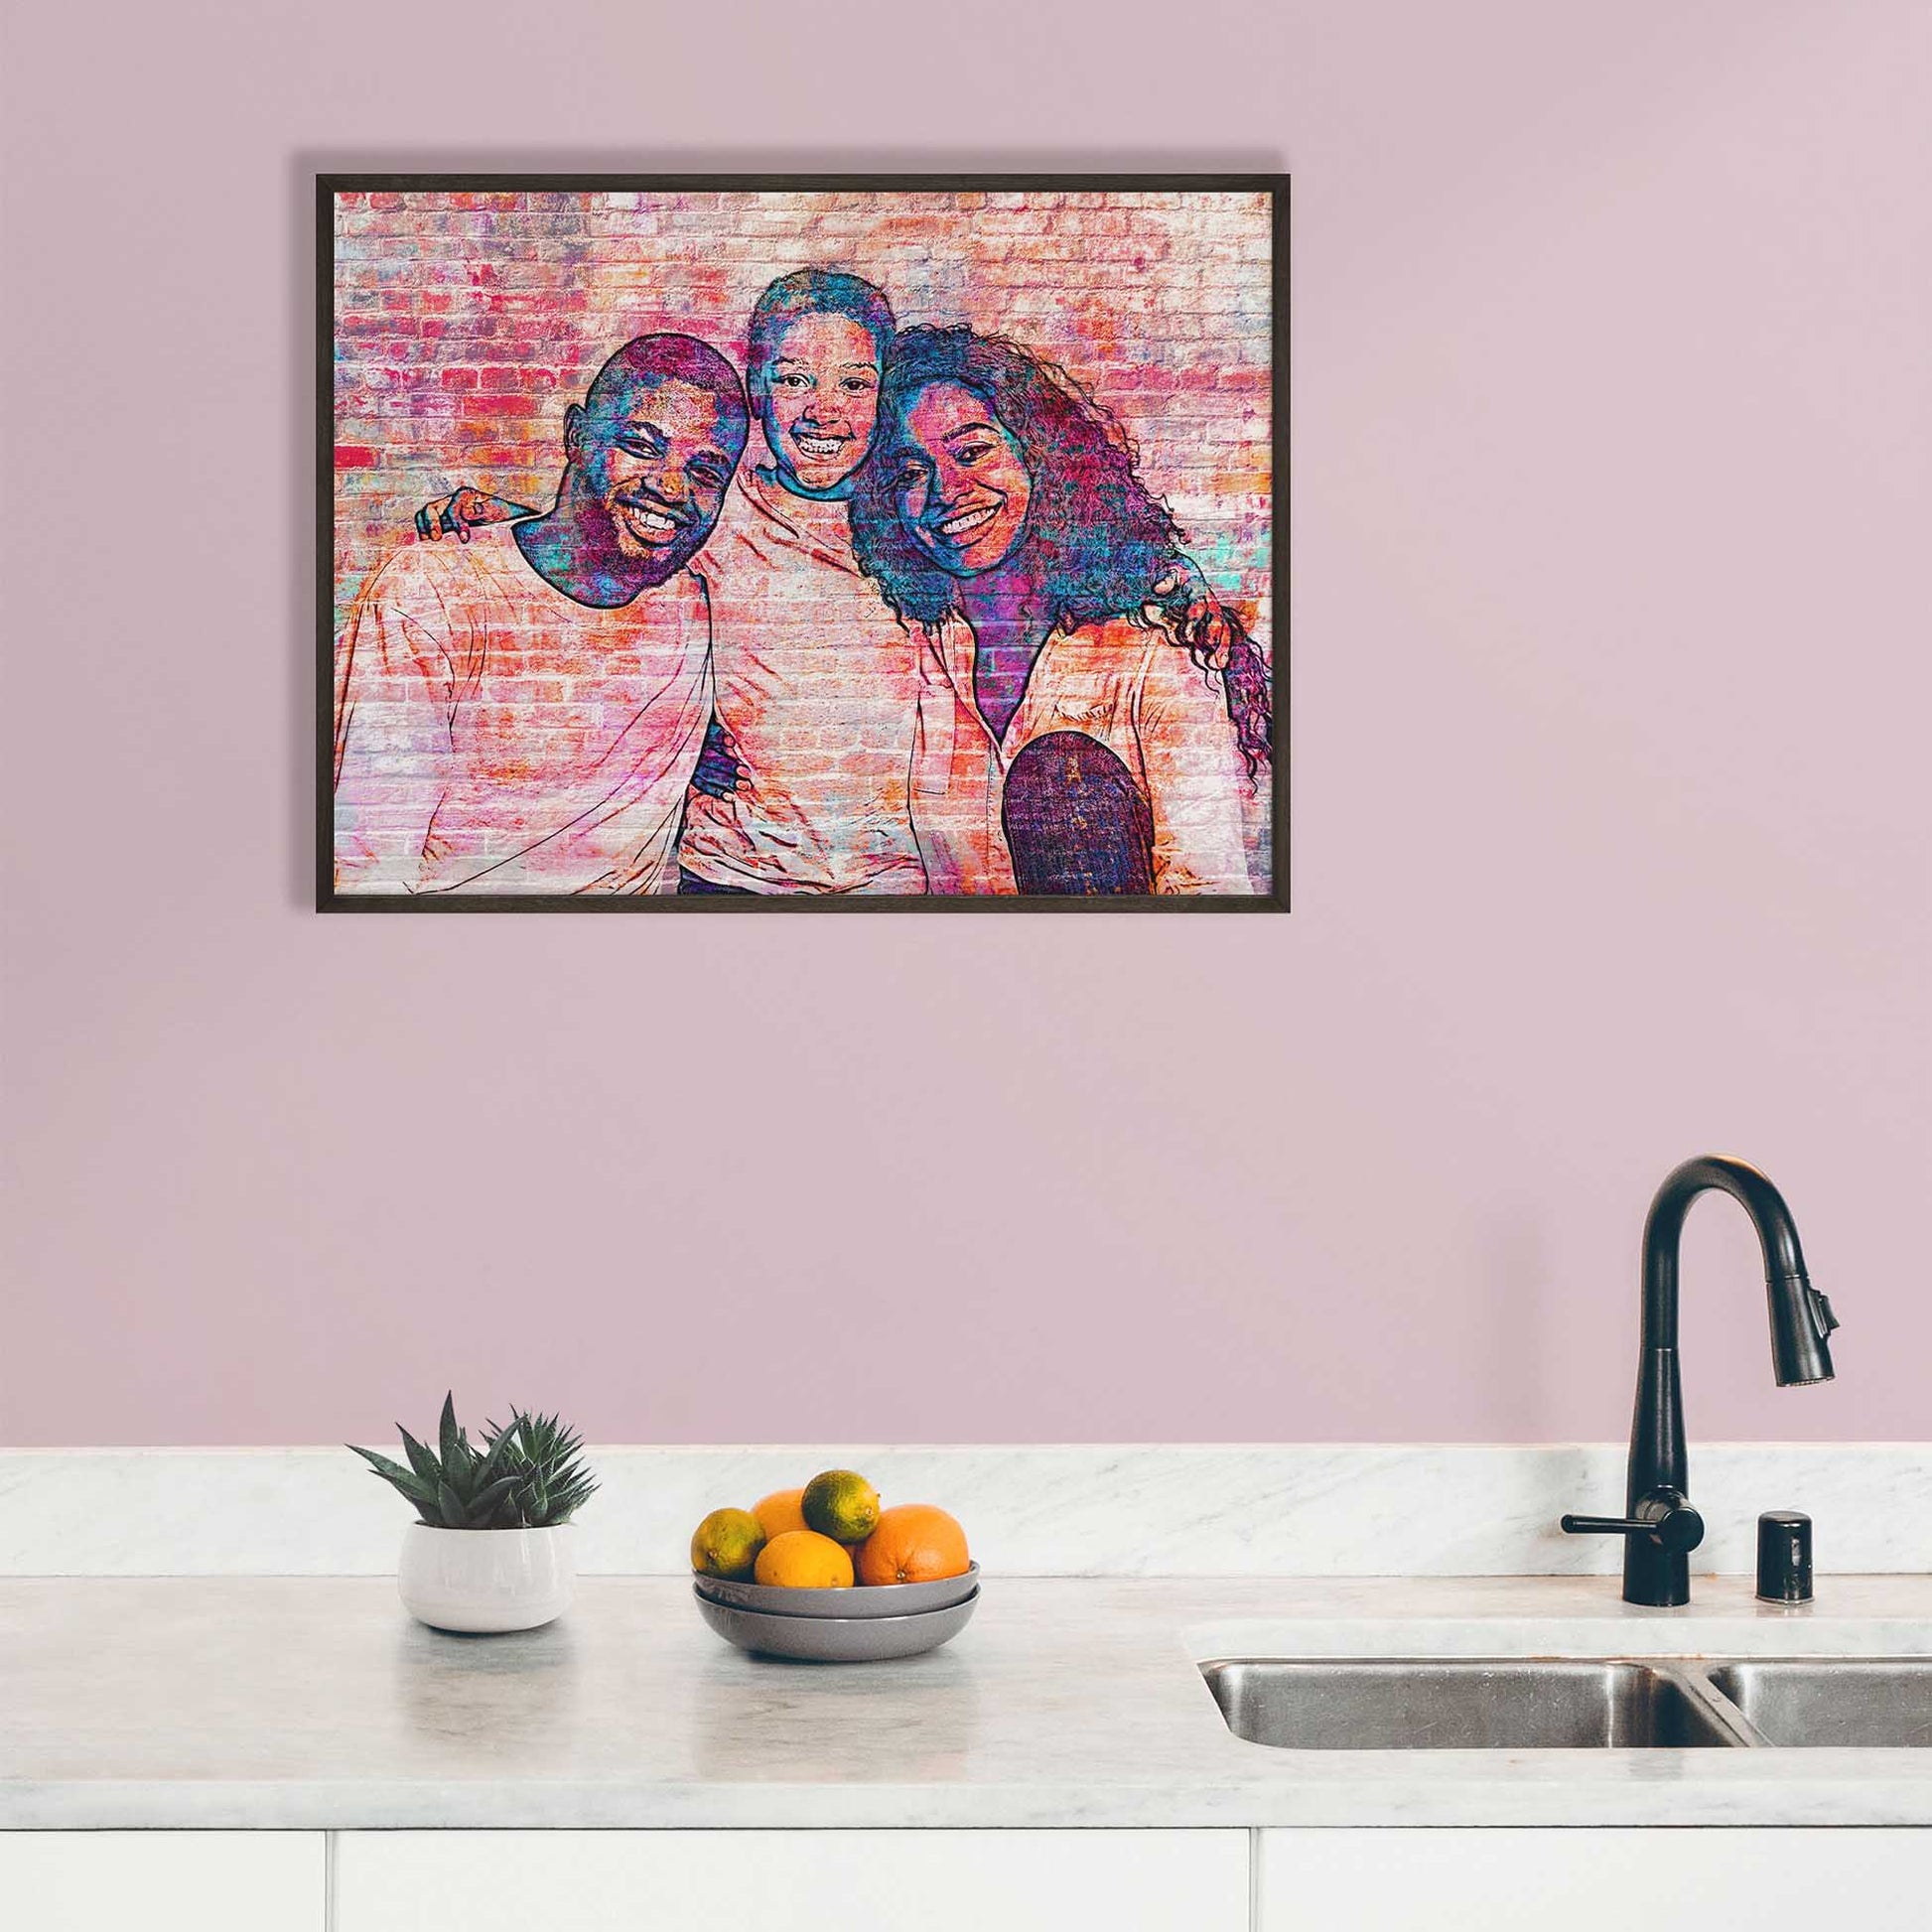 Embrace the urban art scene with our Personalised Brick Graffiti Street Art Framed Print. The cool and fun vibes of this artwork will instantly liven up any room. With its imaginative and bold design, it's a statement piece that brings happiness